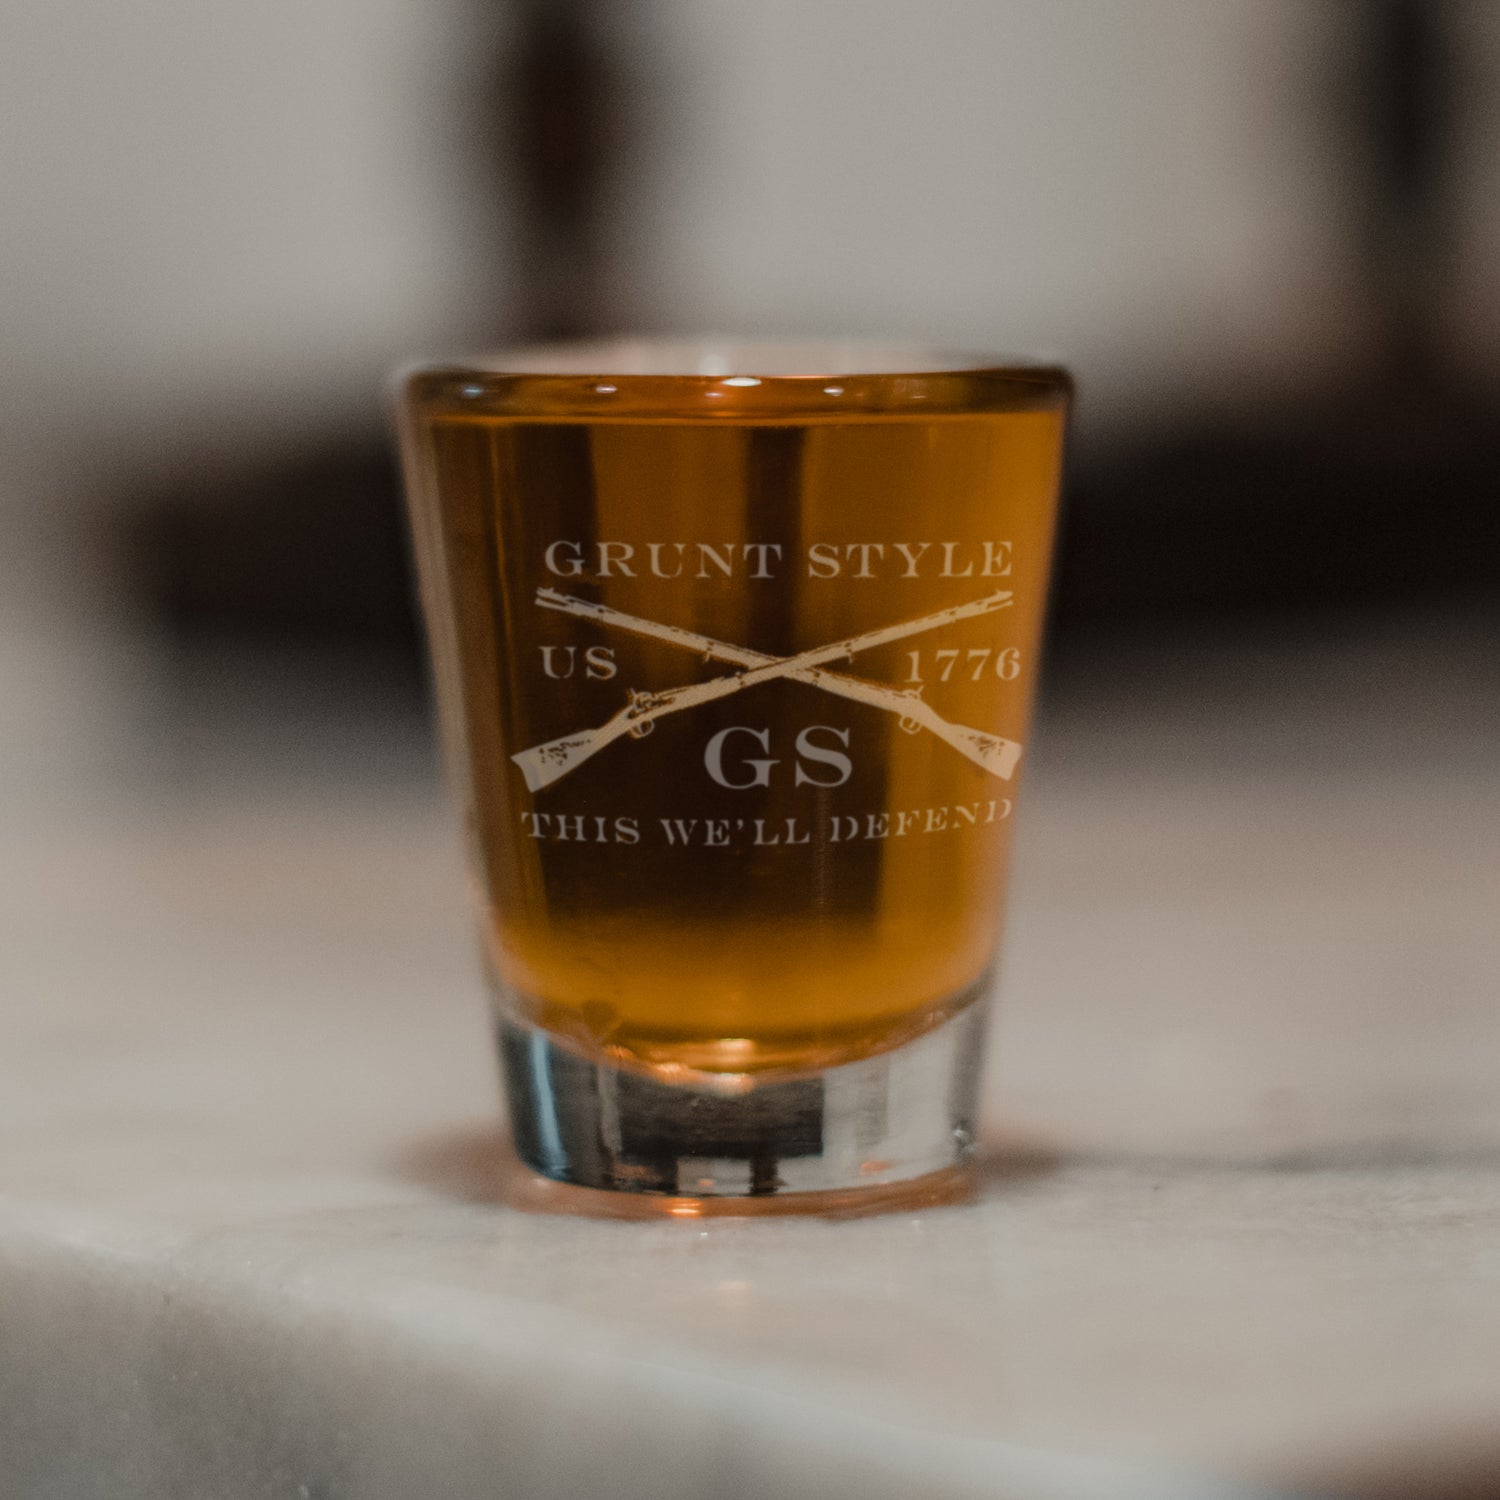  Shot Glass with the Grunt Style Logo 